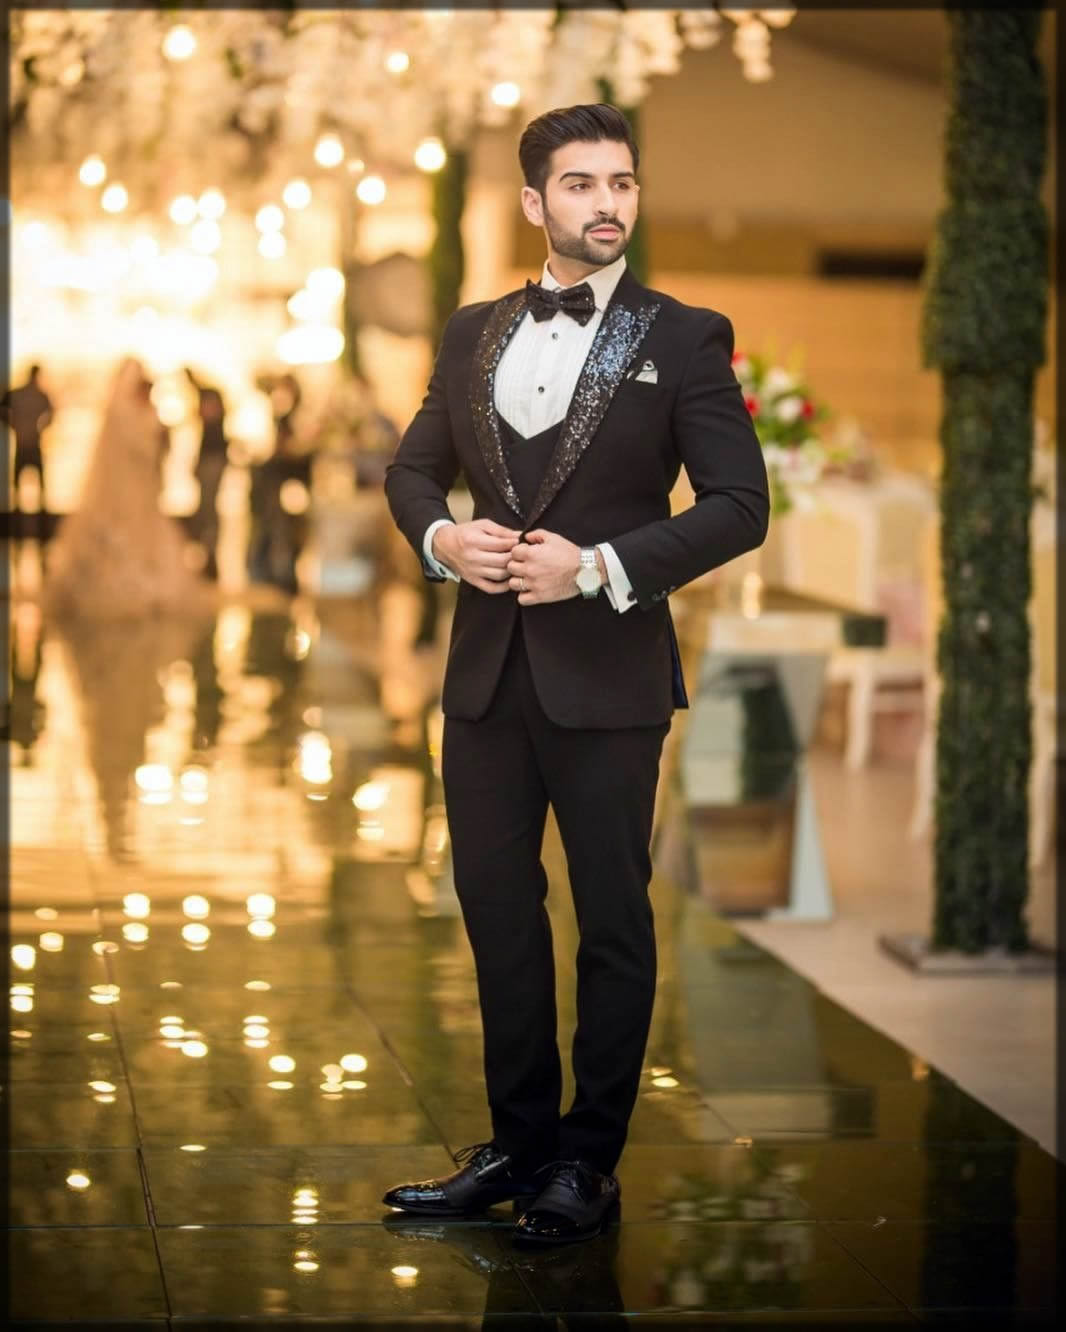 walima dresses for mens